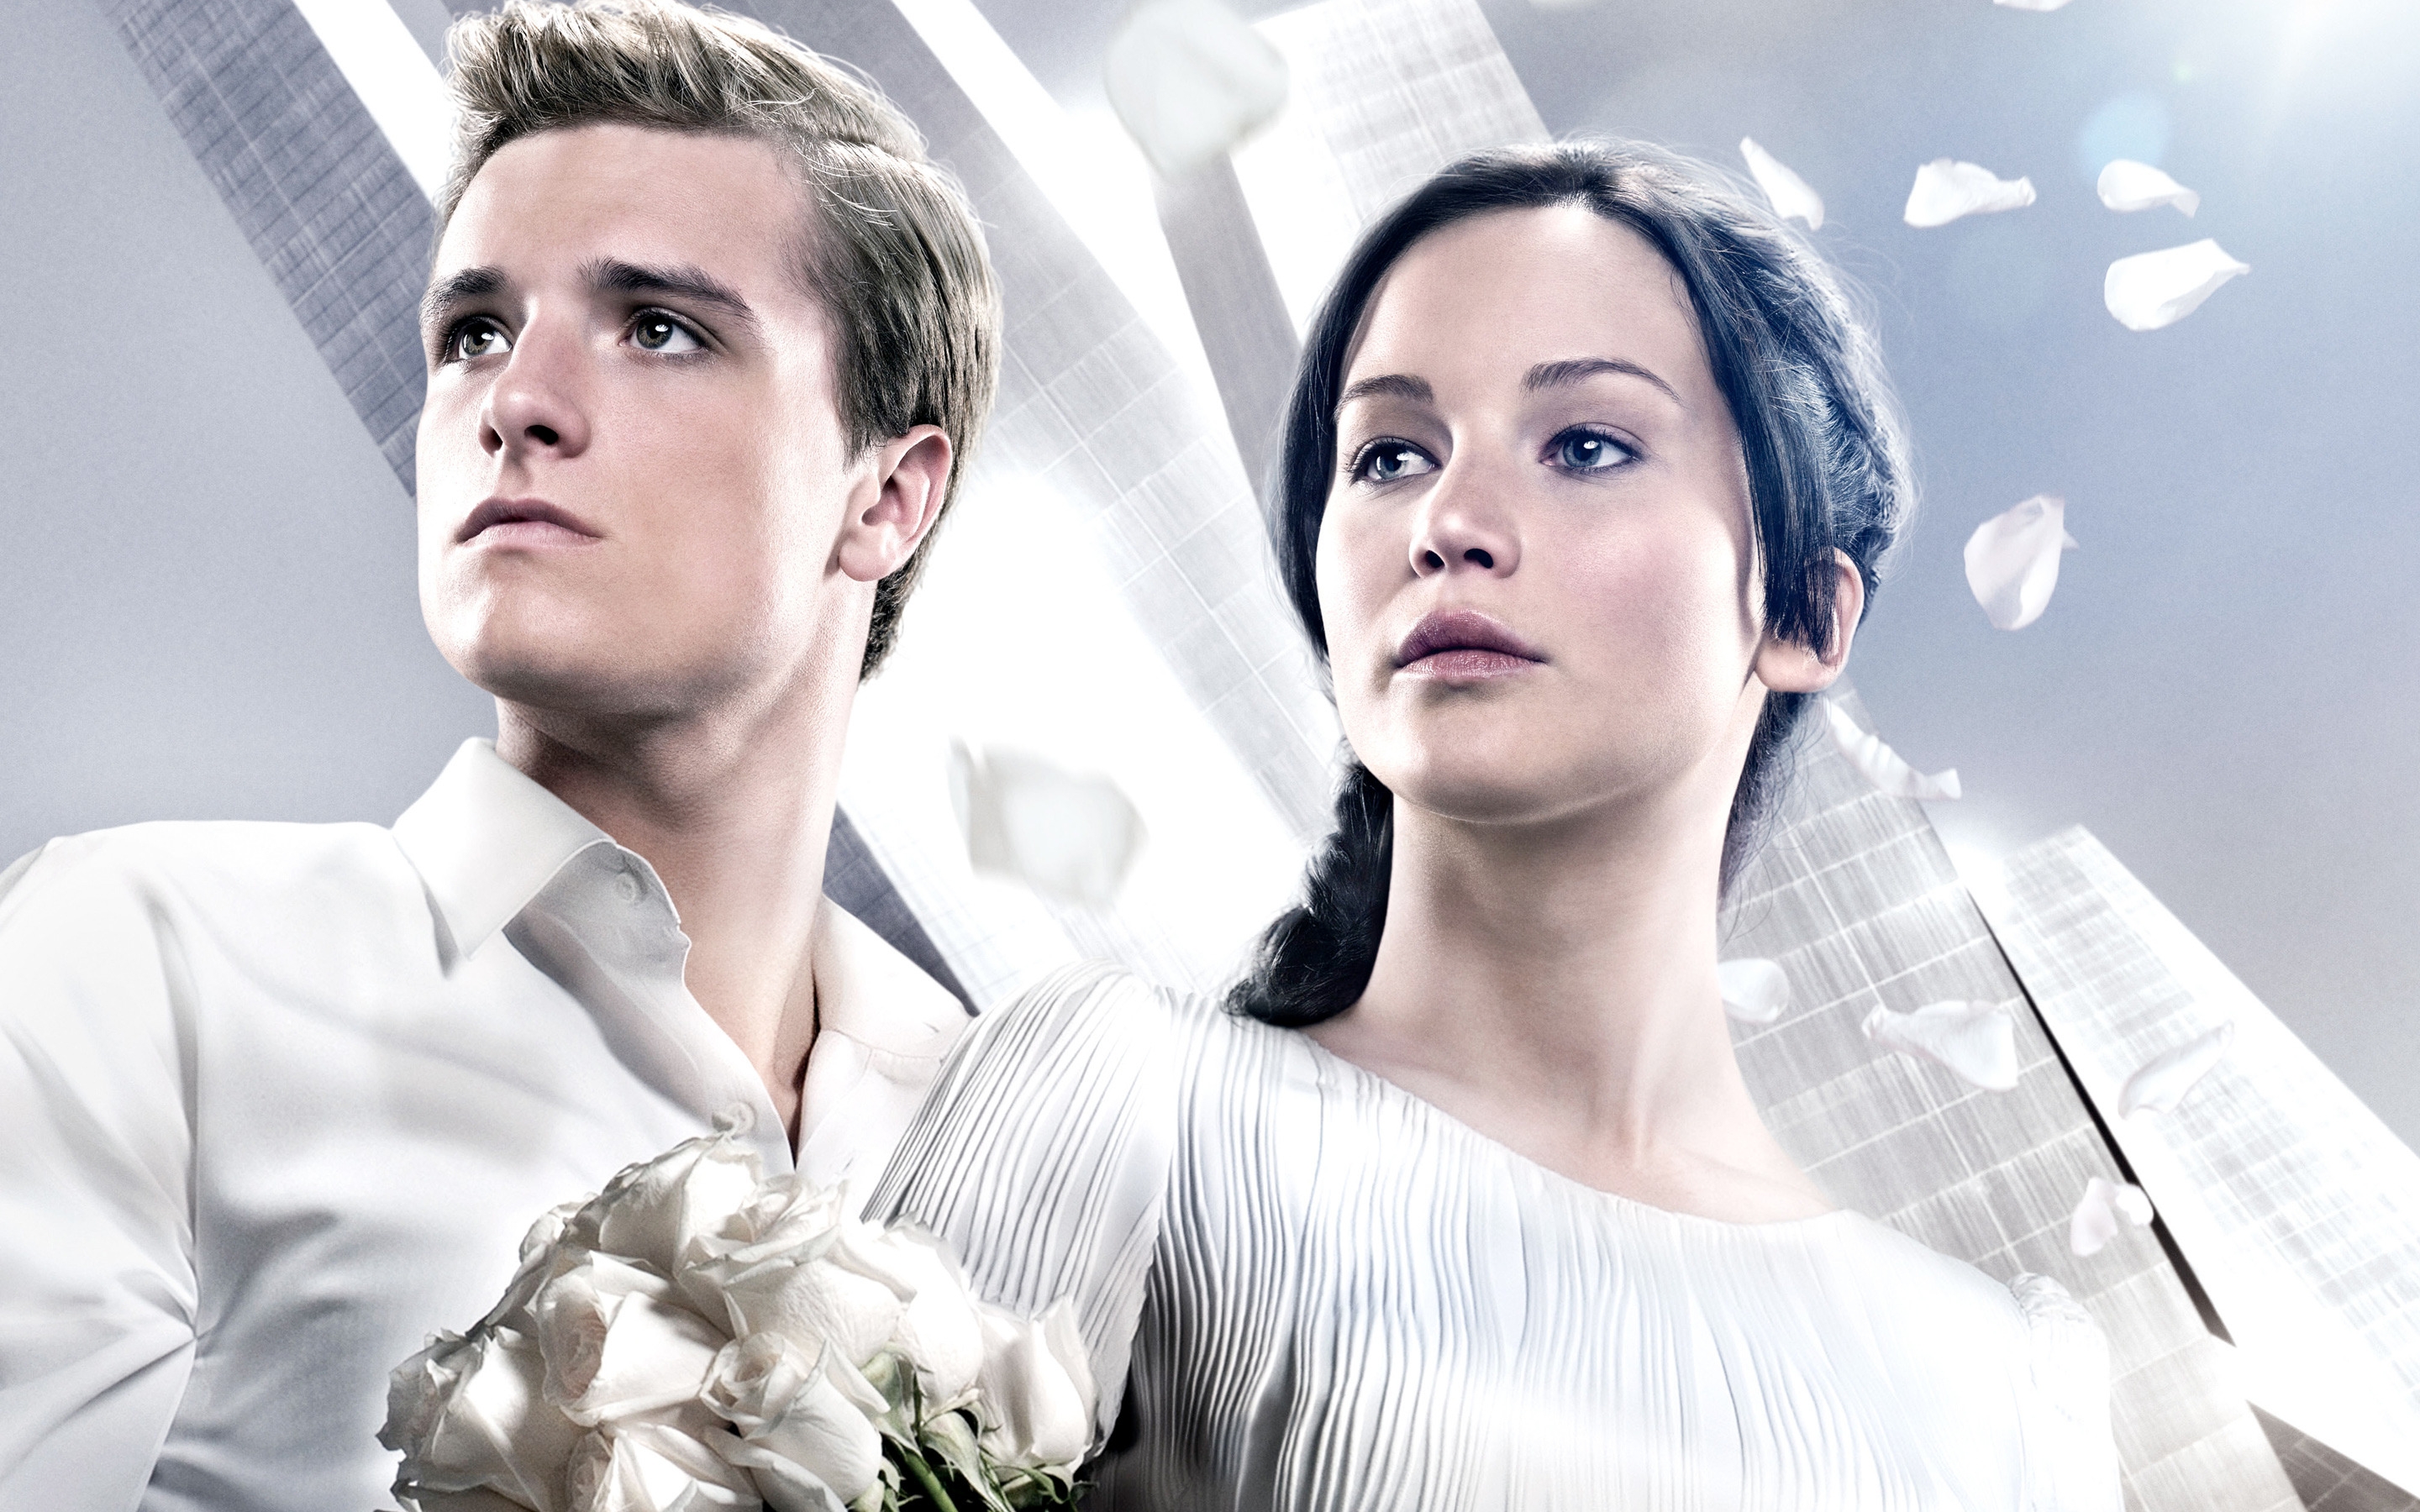 The Hunger Games Catching Fire for 2880 x 1800 Retina Display resolution